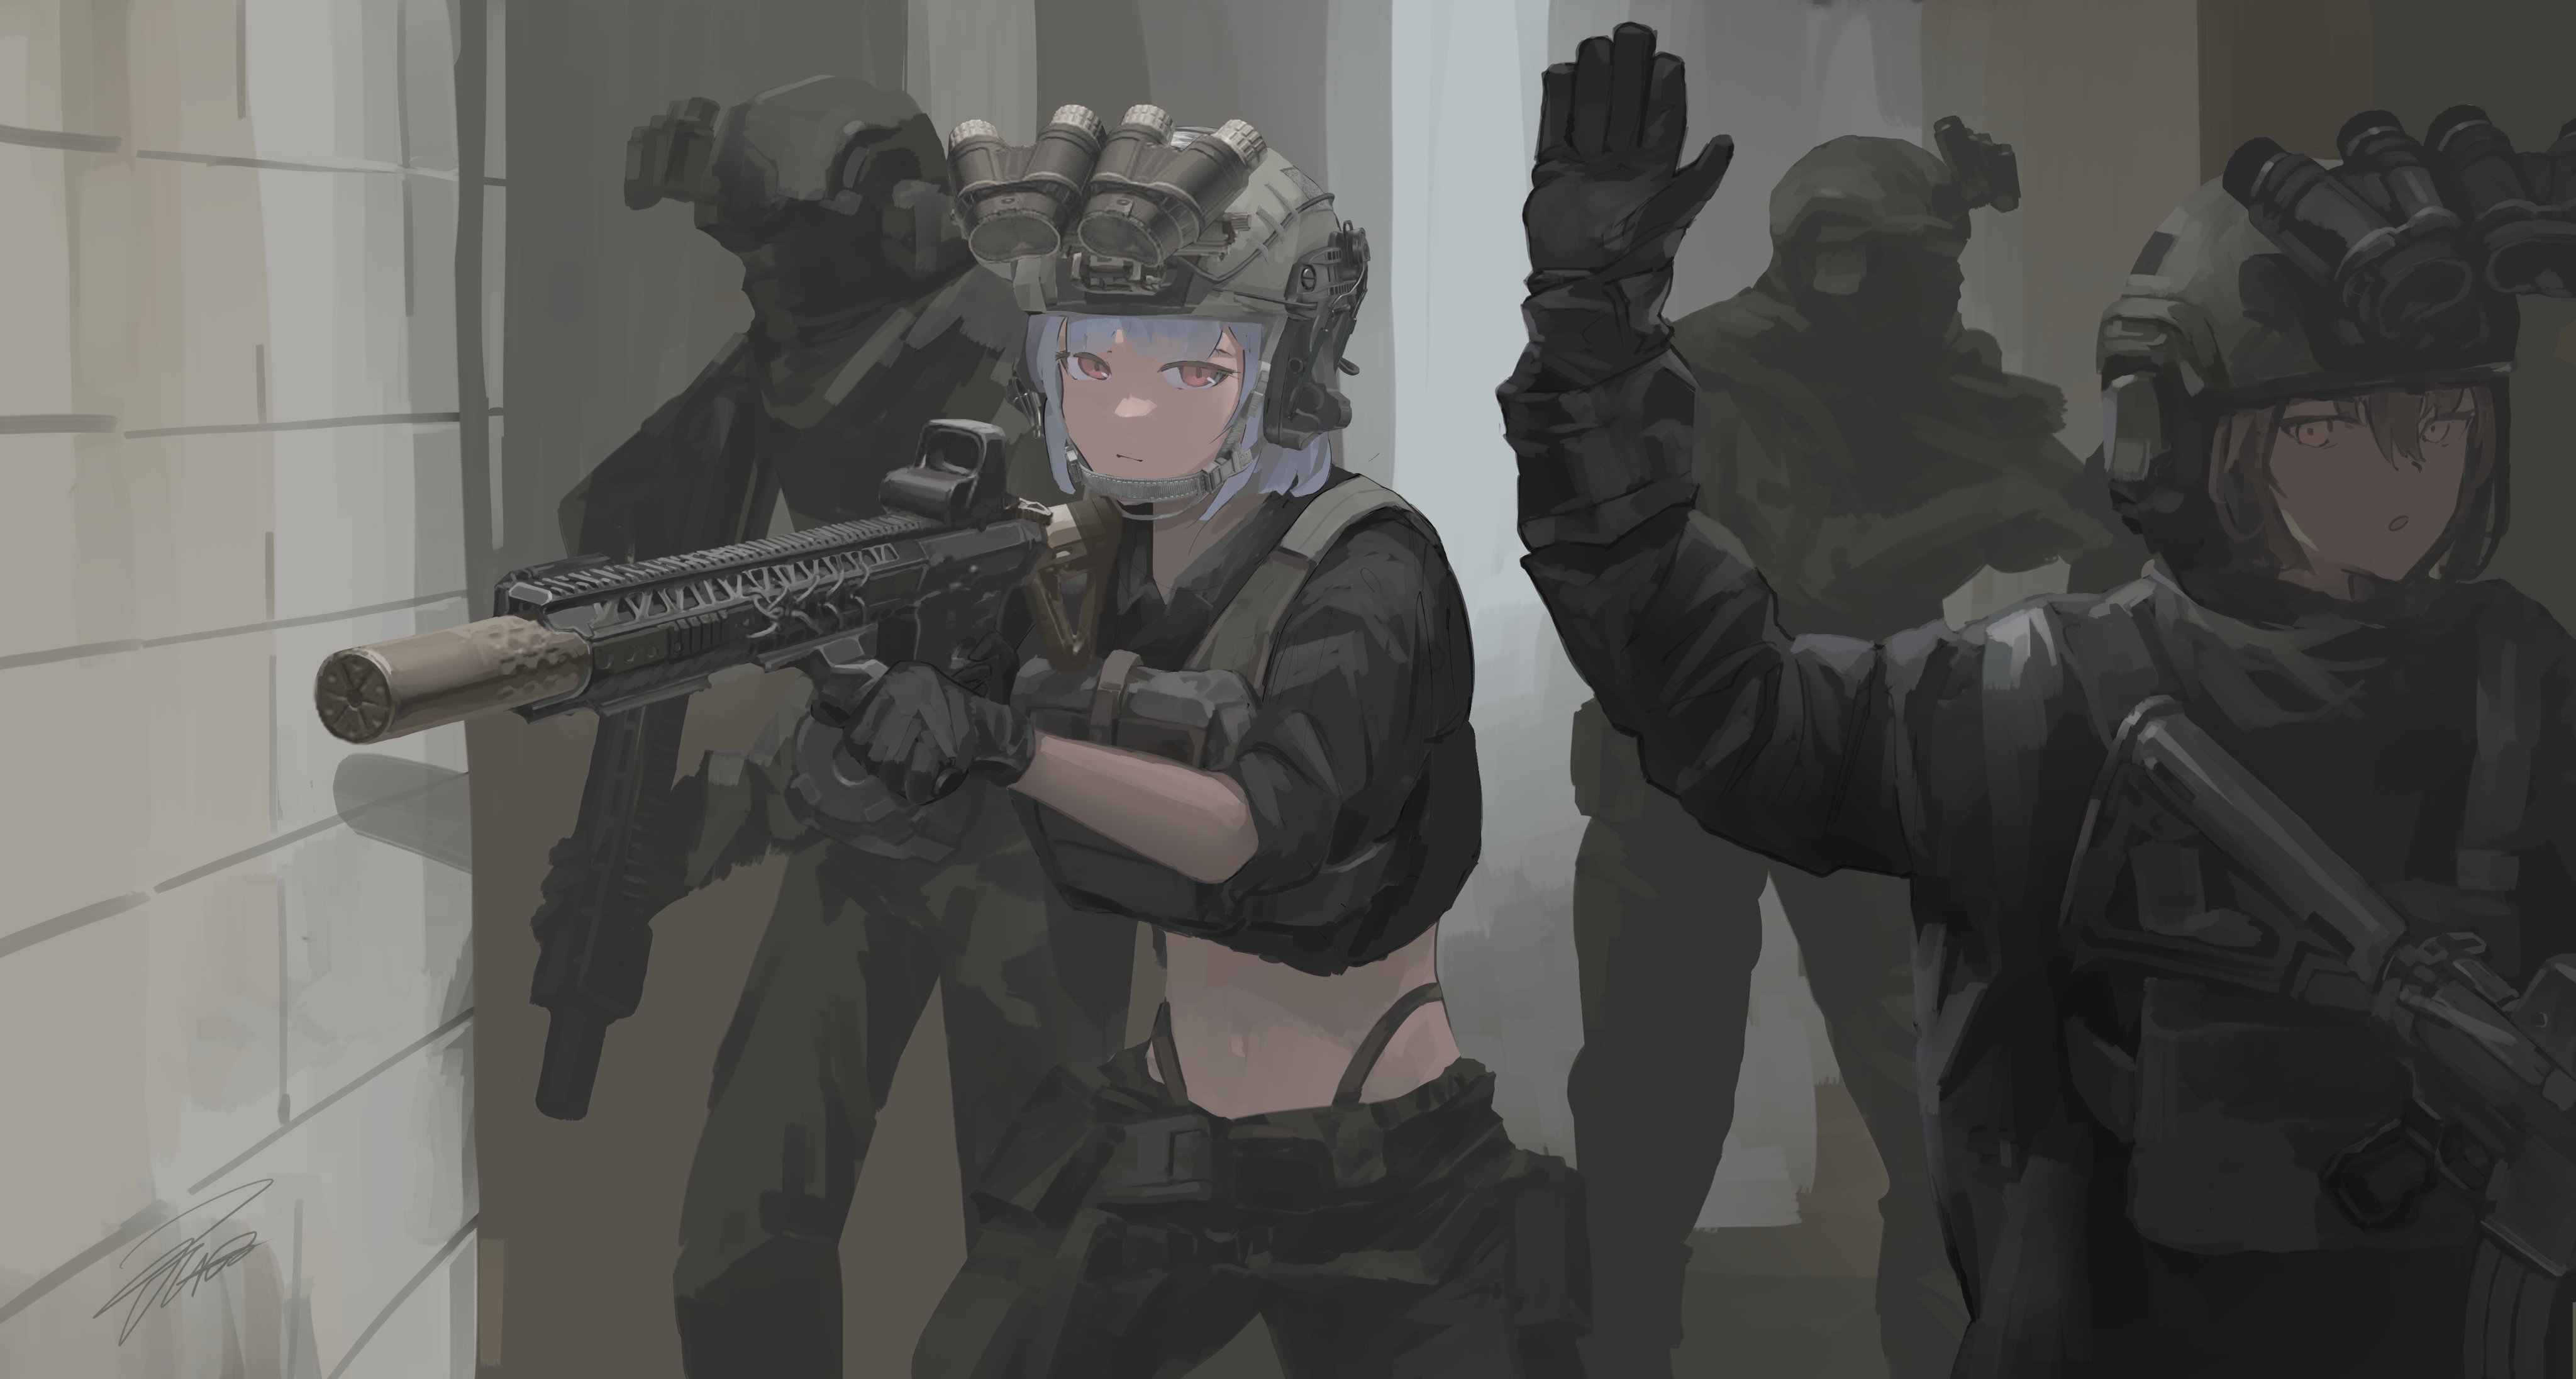 Anime Girls Anime Girls With Guns Special Forces Night Vision Goggles Gun Gloves Helmet Uniform Look 4096x2192